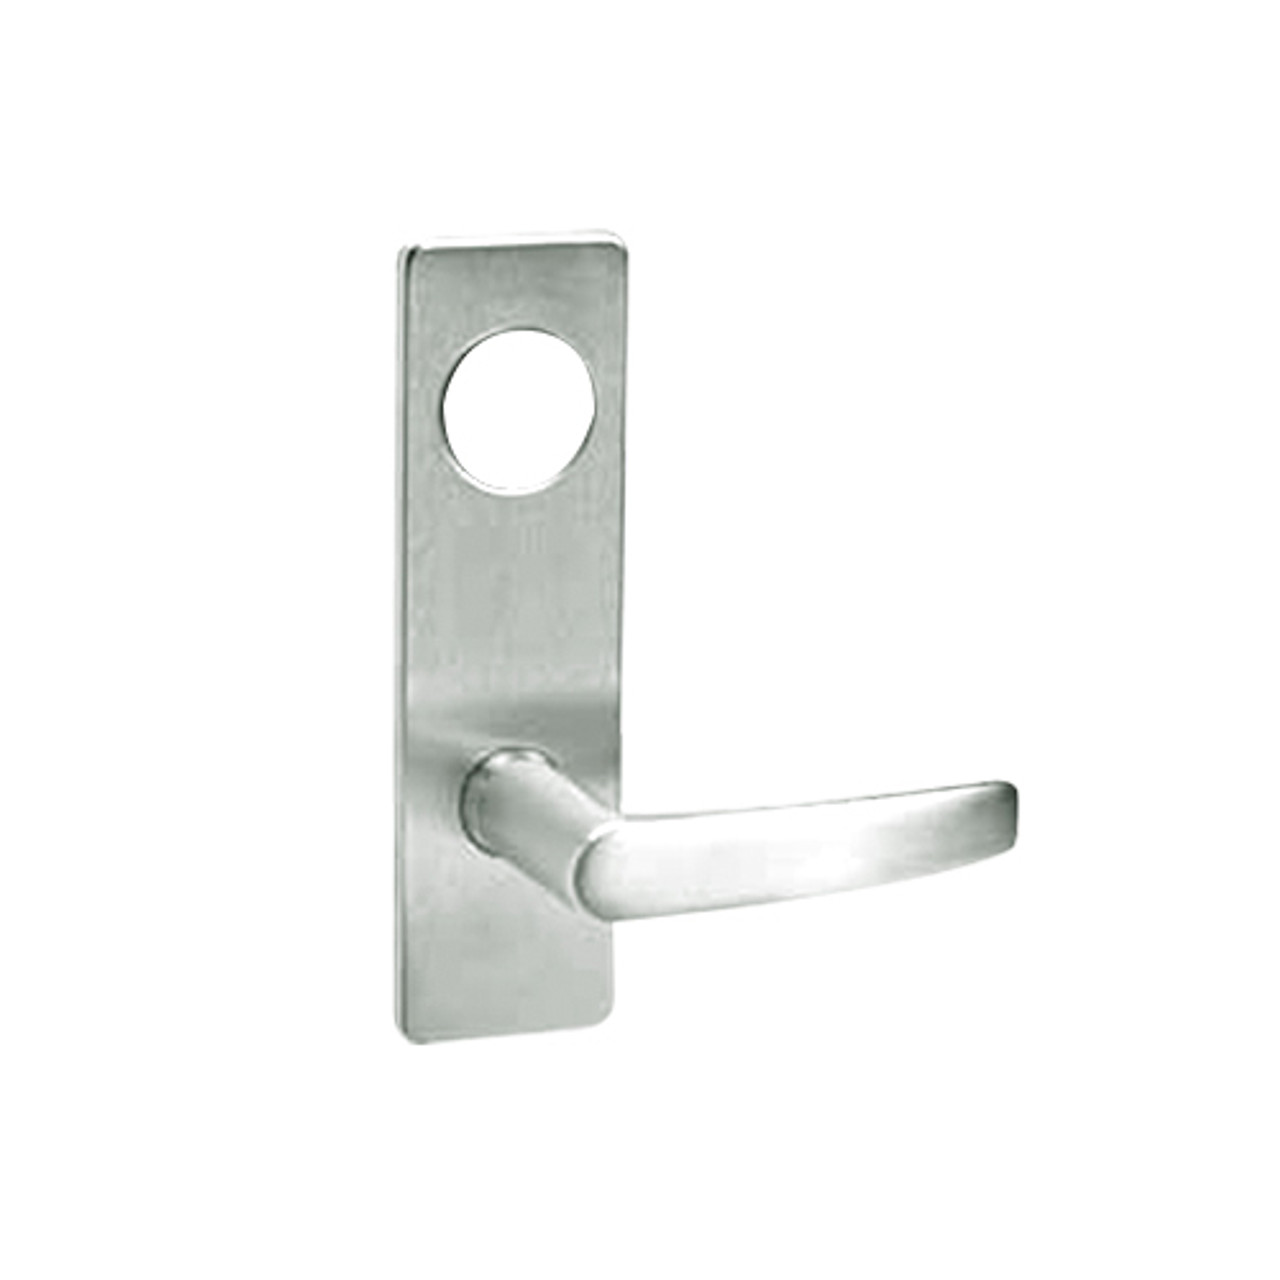 ML2057-ASR-618-CL6 Corbin Russwin ML2000 Series IC 6-Pin Less Core Mortise Storeroom Locksets with Armstrong Lever in Bright Nickel